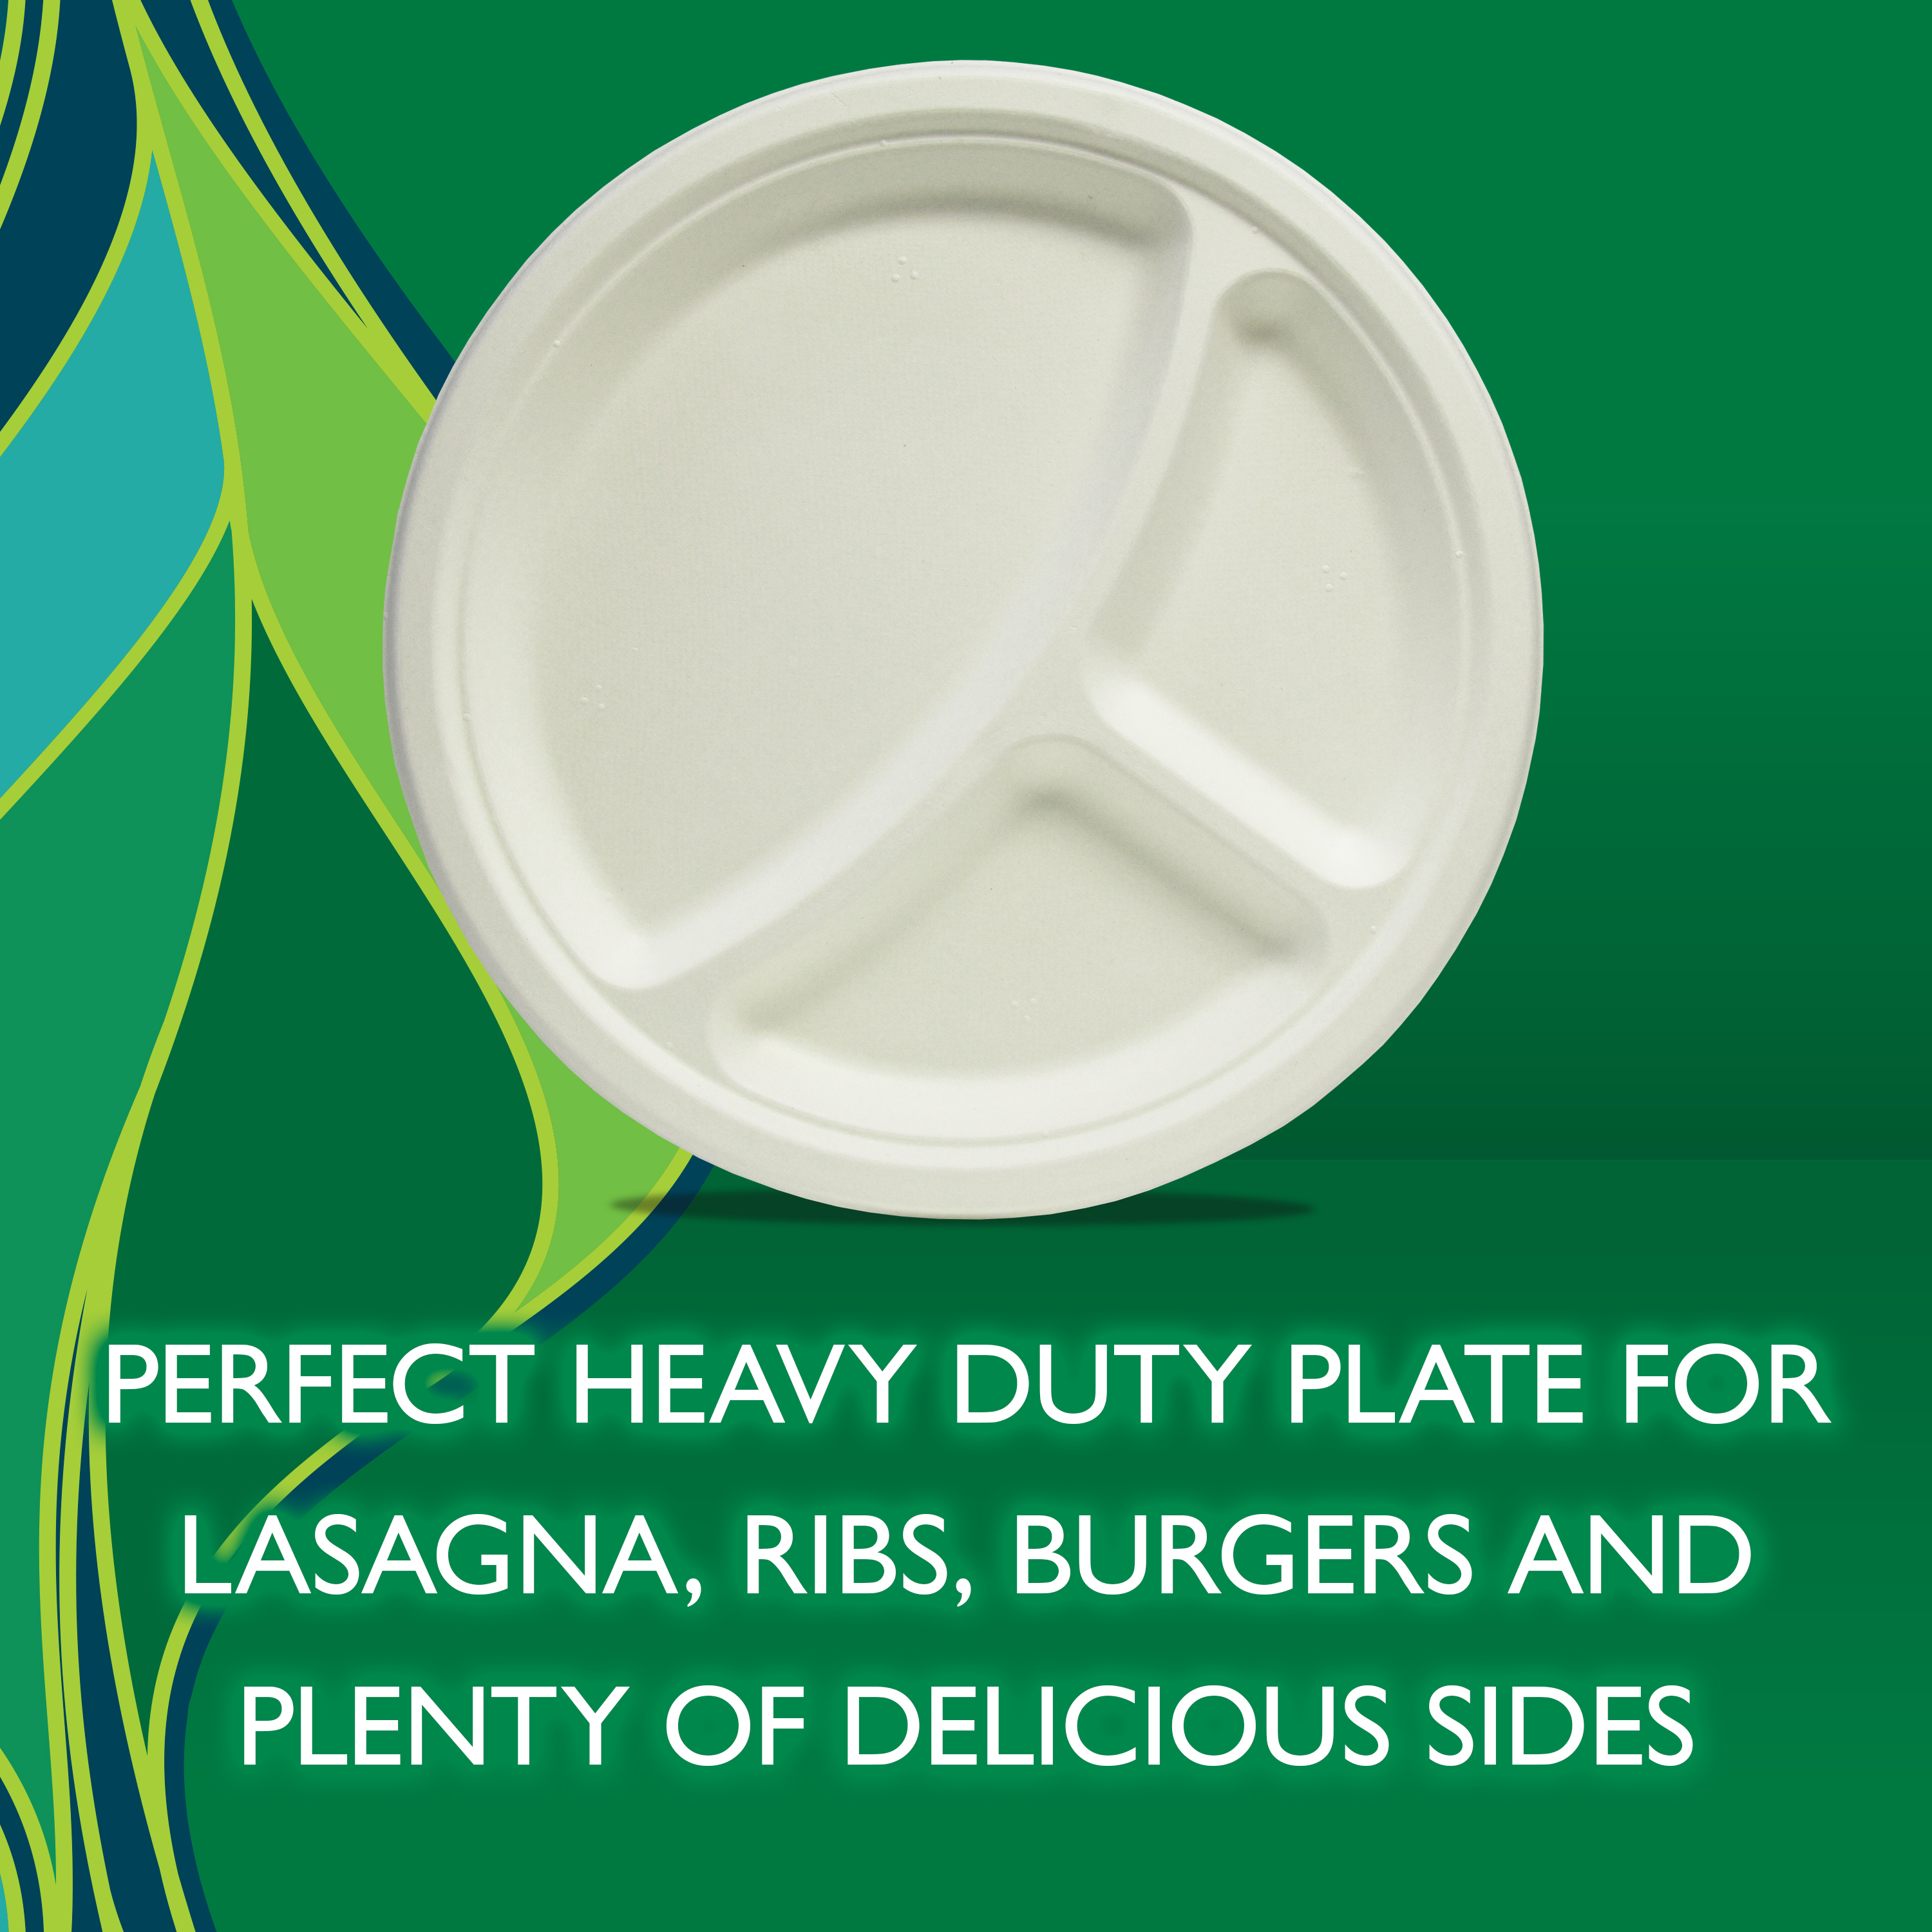 Hefty ECOSAVE Compostable Paper Plates, 10-1/8 inch, 16 Count - image 5 of 7